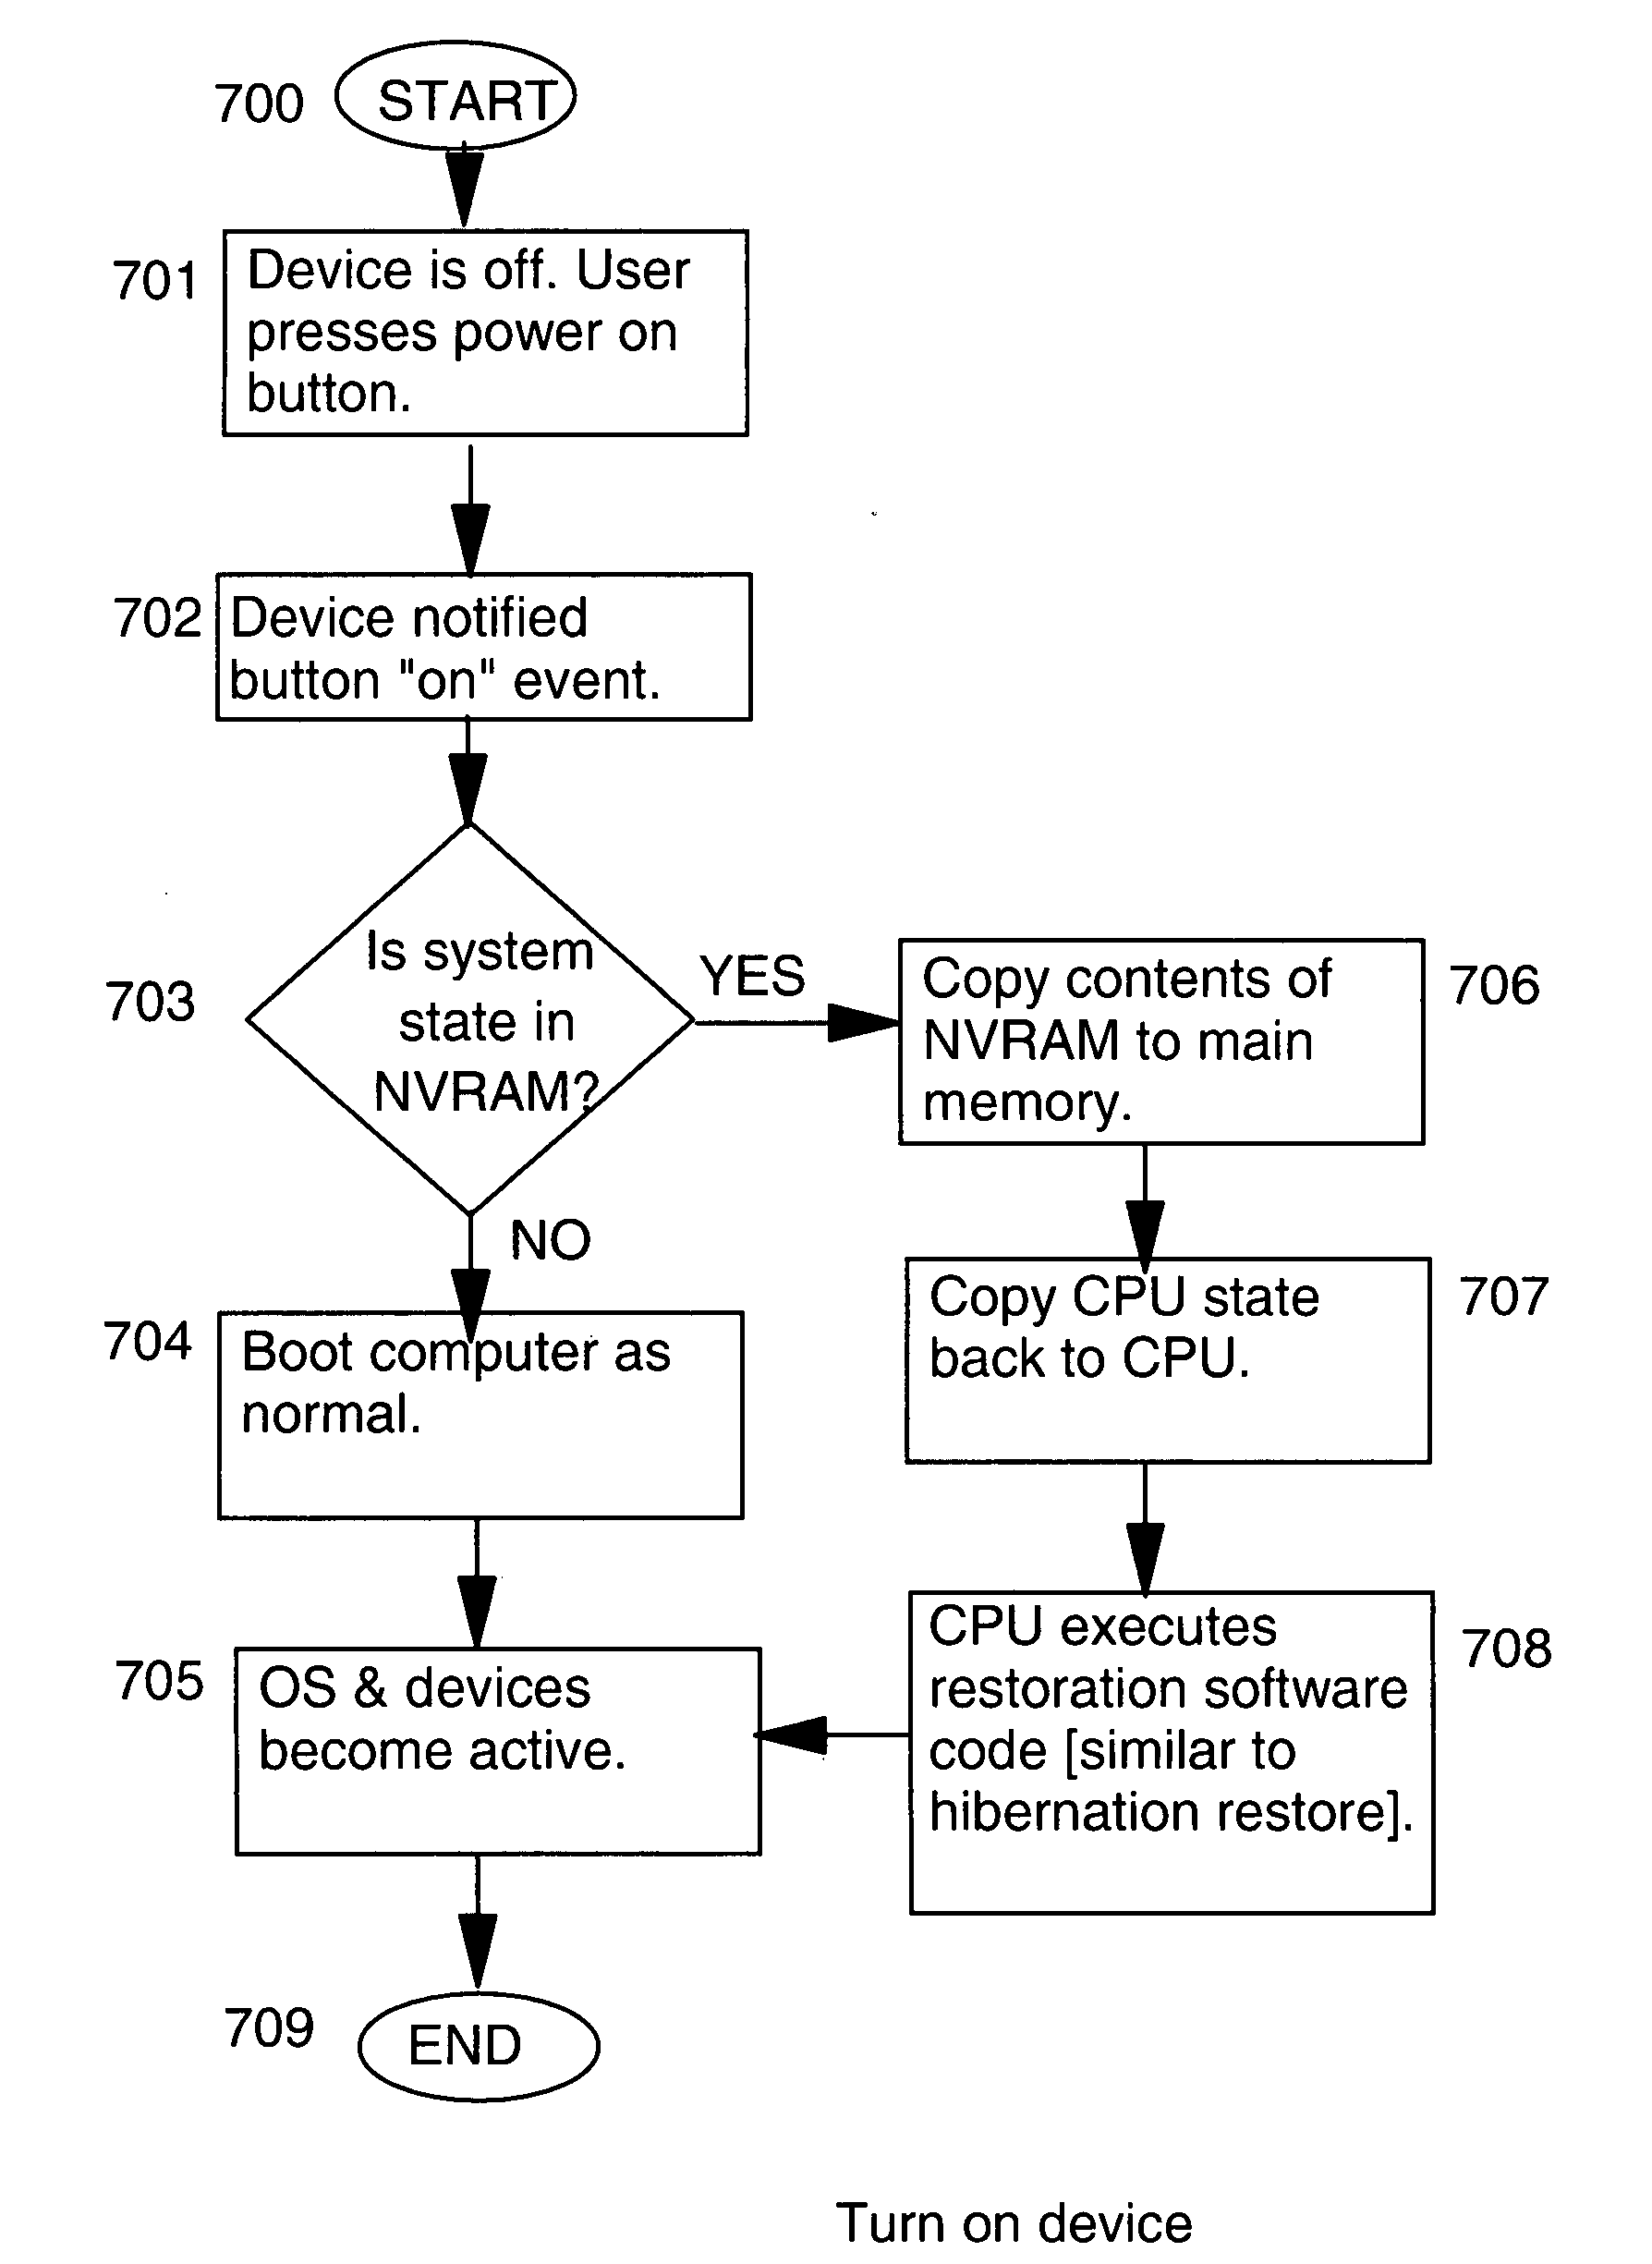 Mirroring system memory in non-volatile random access memory (NVRAM) for fast power on/off cycling